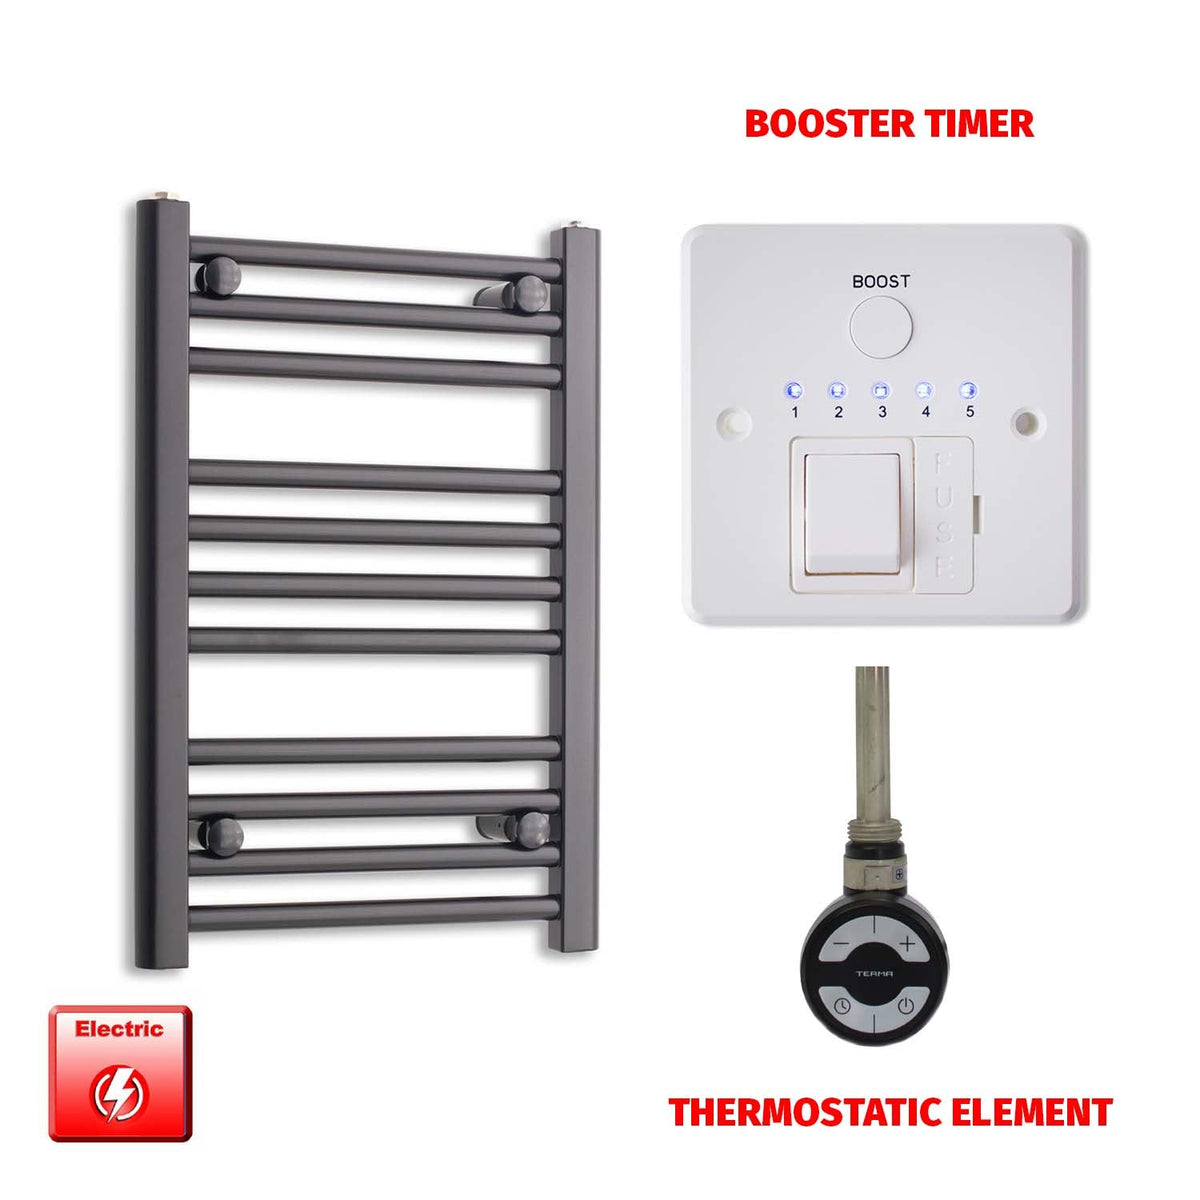 600 x 450 Flat Black Pre-Filled Electric Heated Towel Radiator HTR MOA Thermostatic Booster Timer